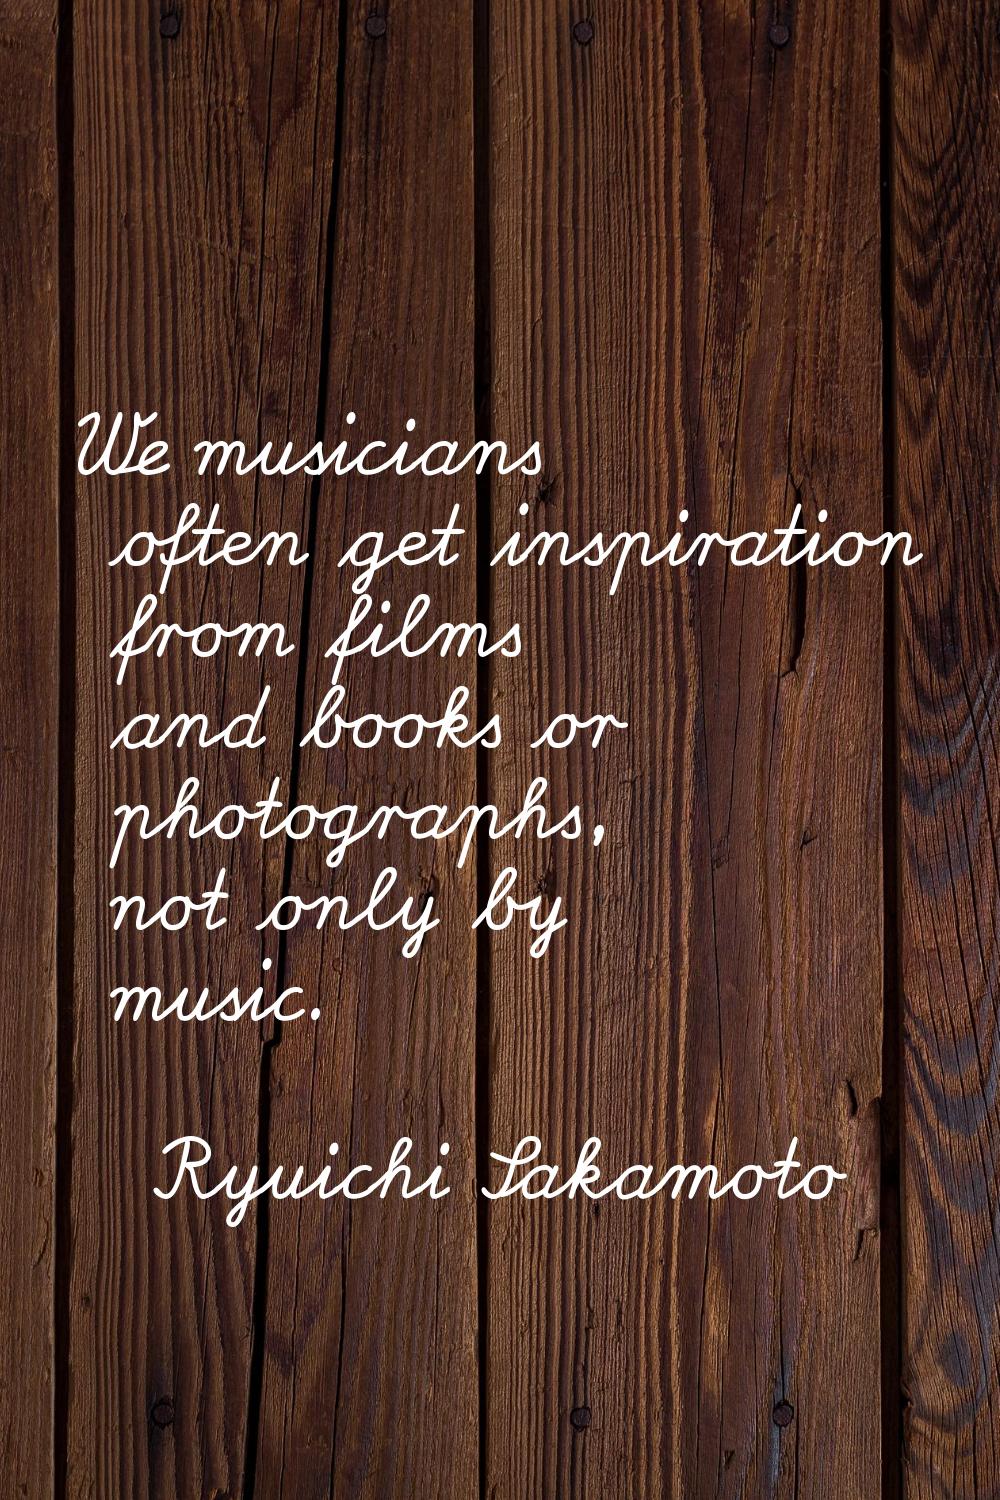 We musicians often get inspiration from films and books or photographs, not only by music.